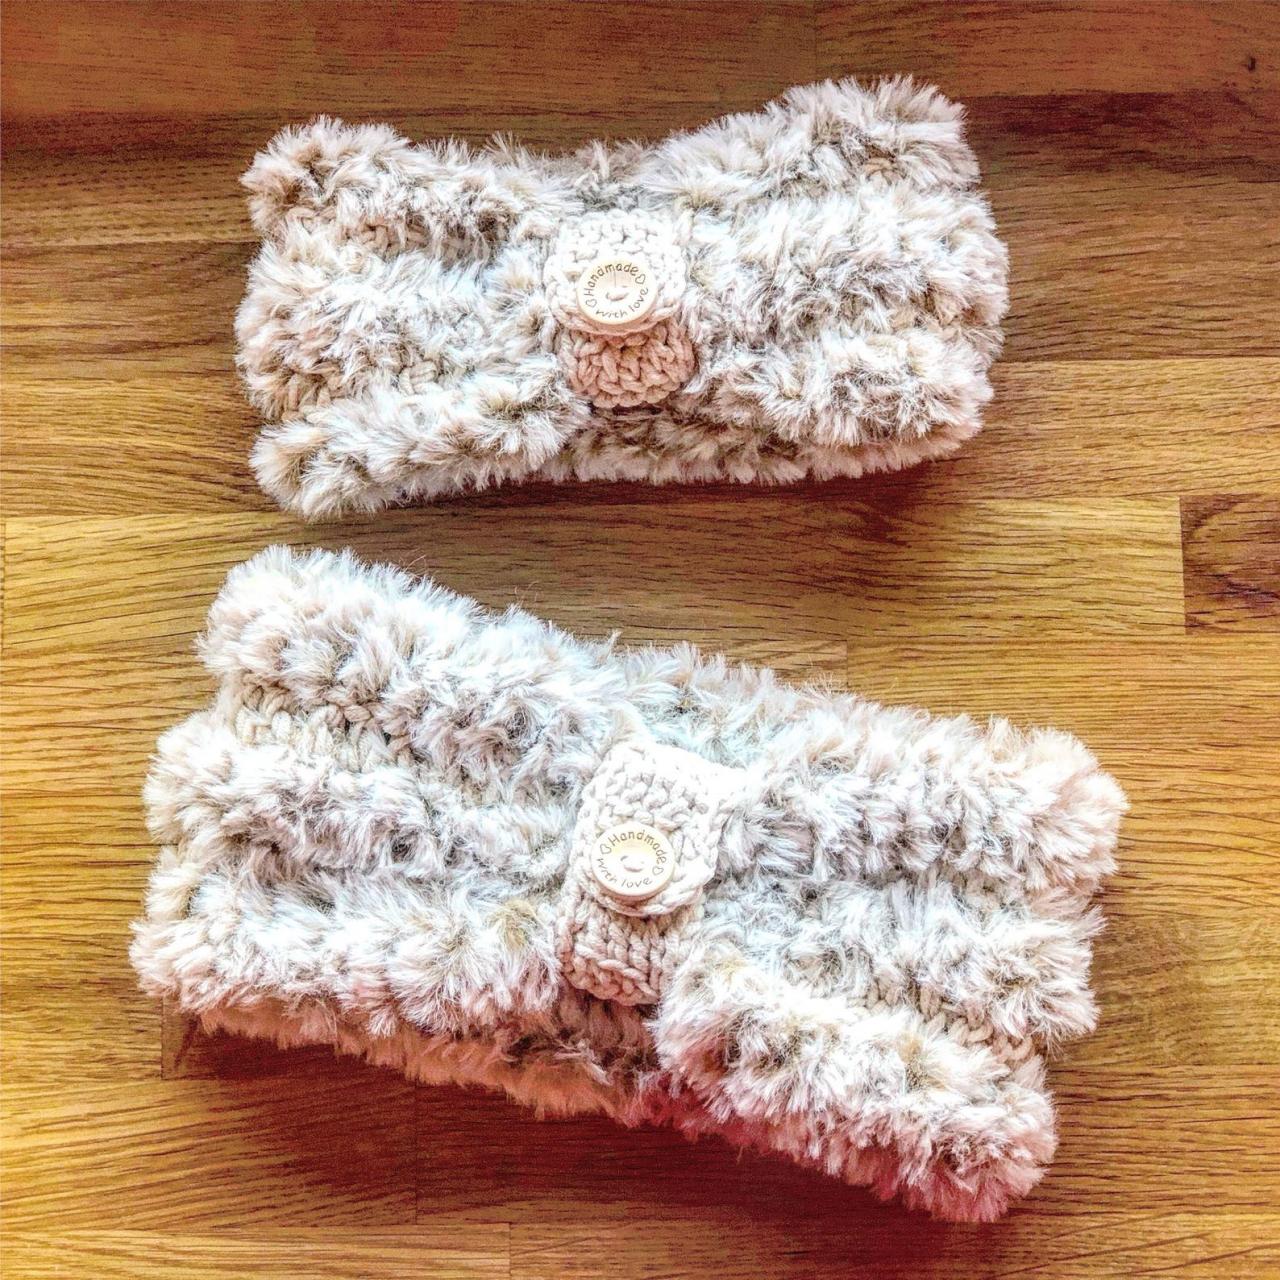 Crochet Earwarmers (2 Peaces) 2 In 1 (with Or Without Button Ring), Adult Headband, Teen Headband, Soft Fake Furr, Mom And Doughter Set